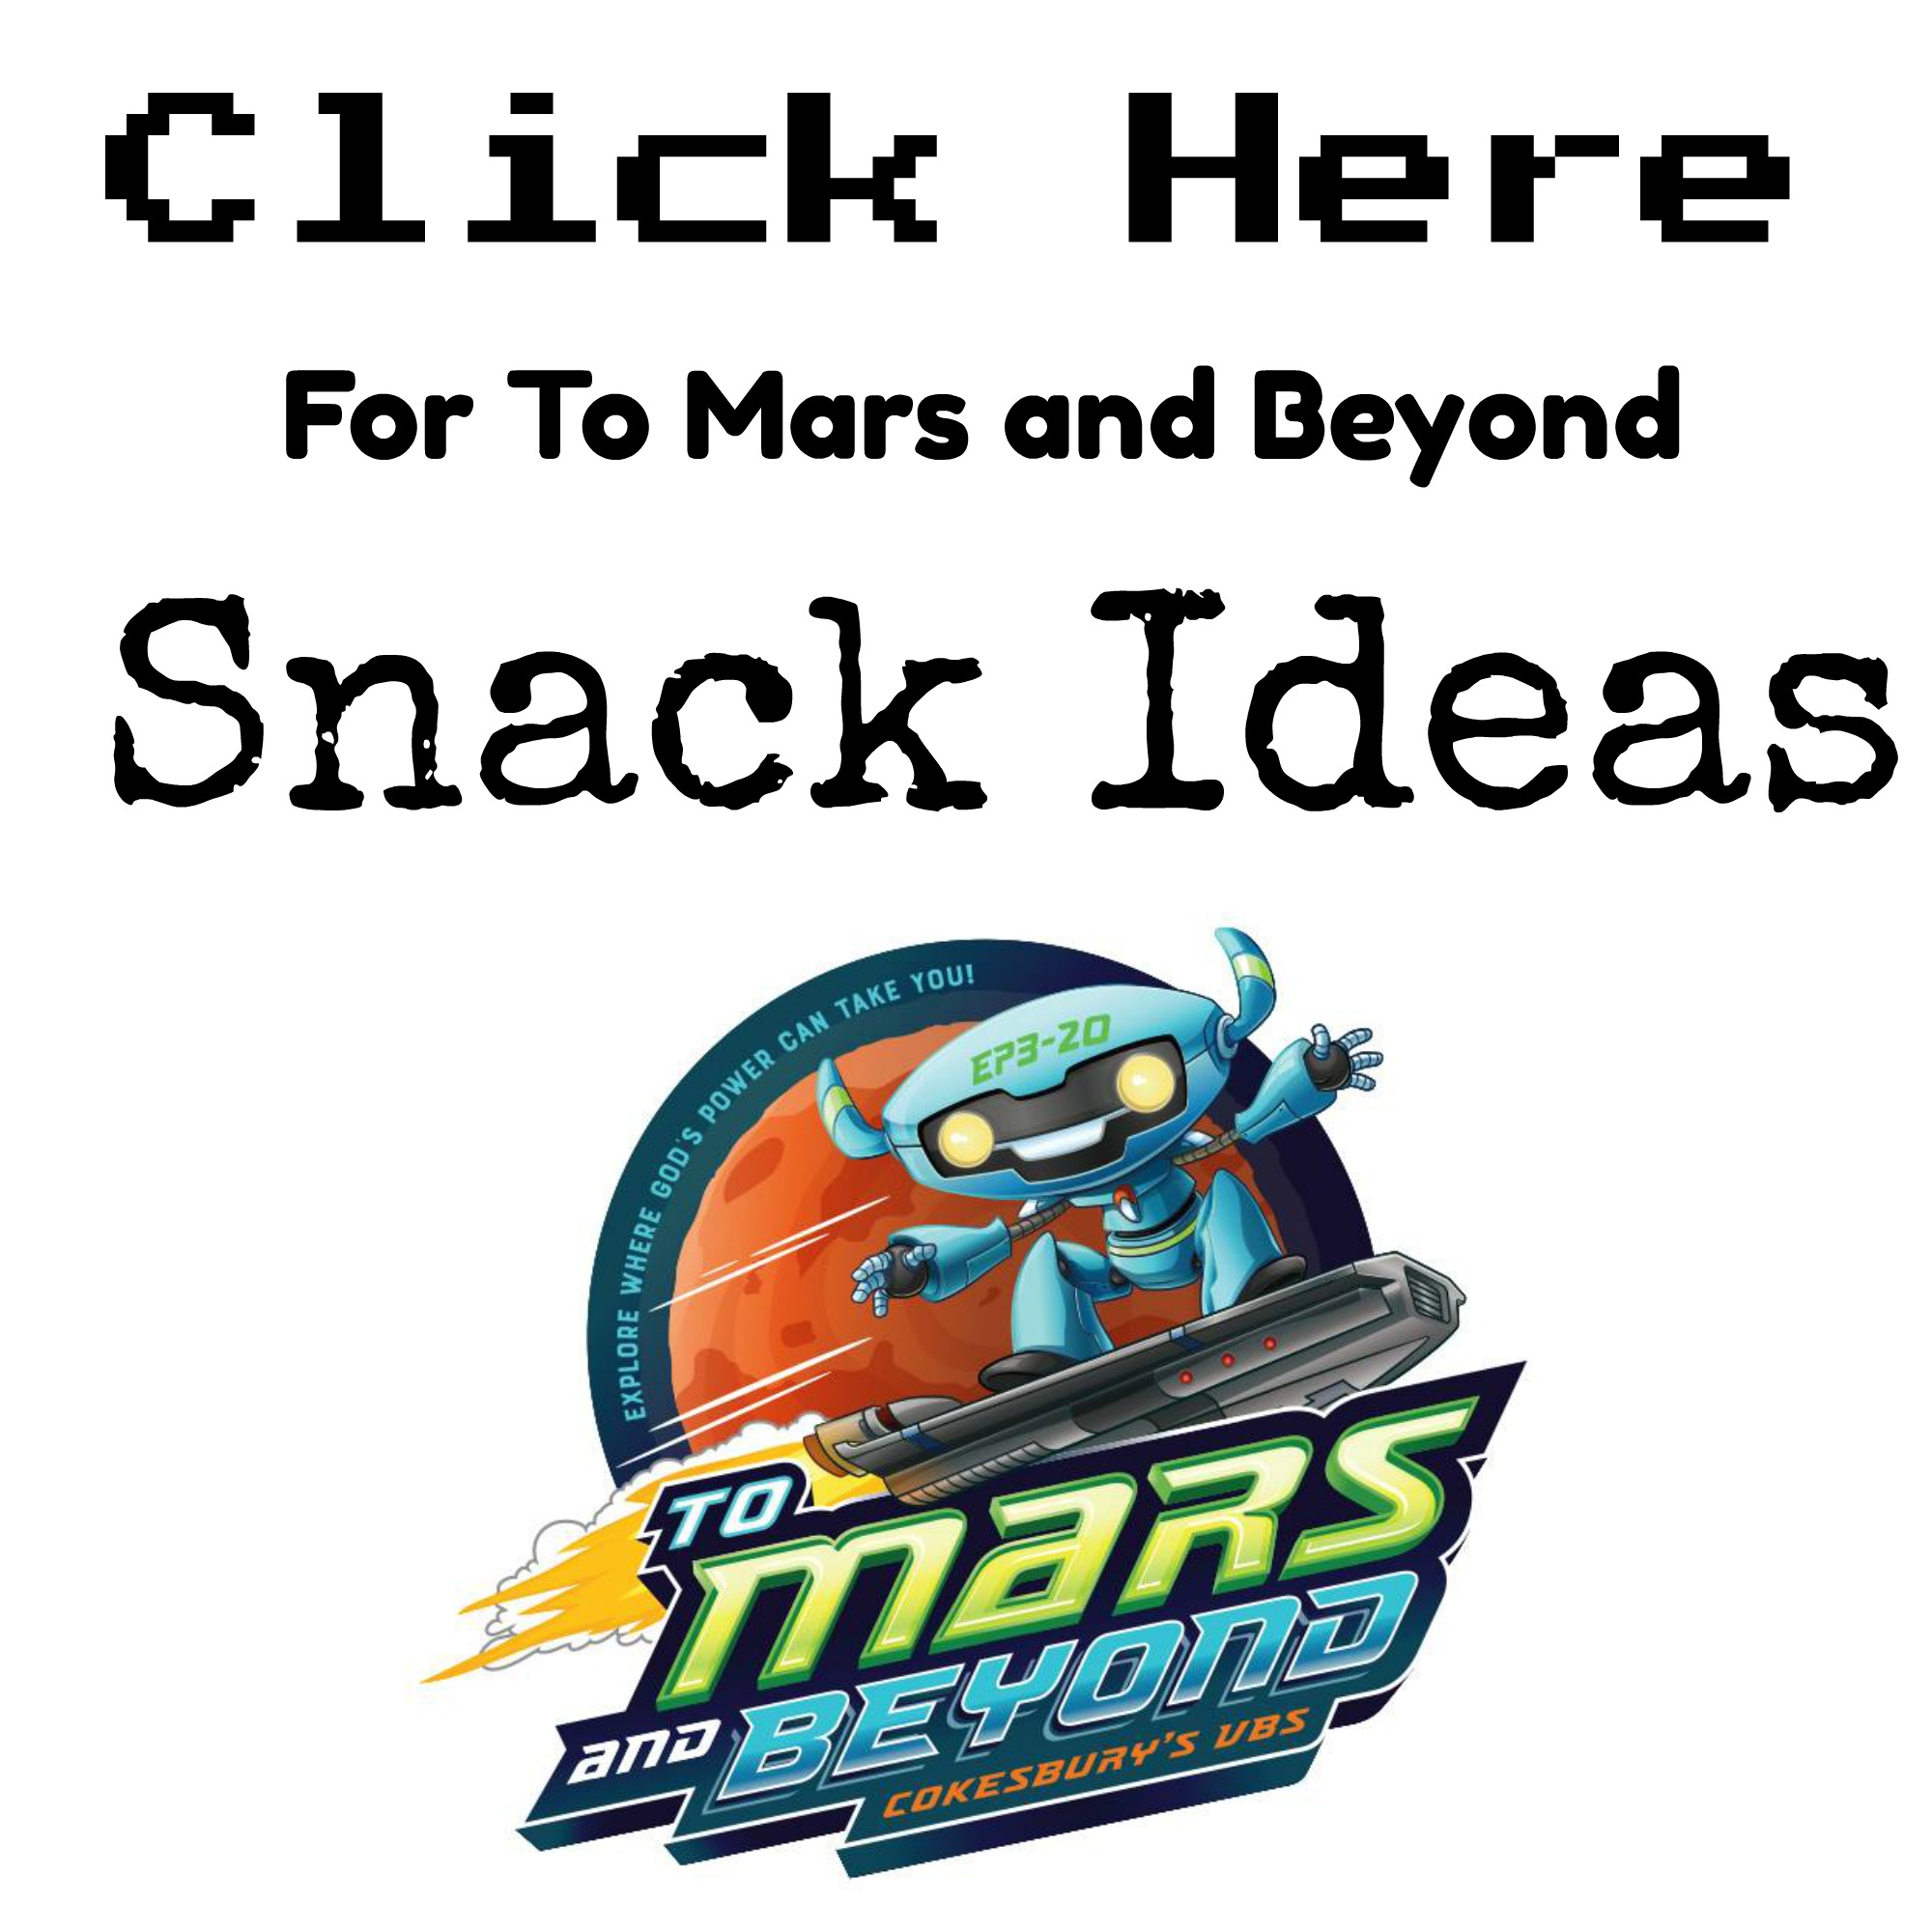 To Mars and Beyond Snack Ideas